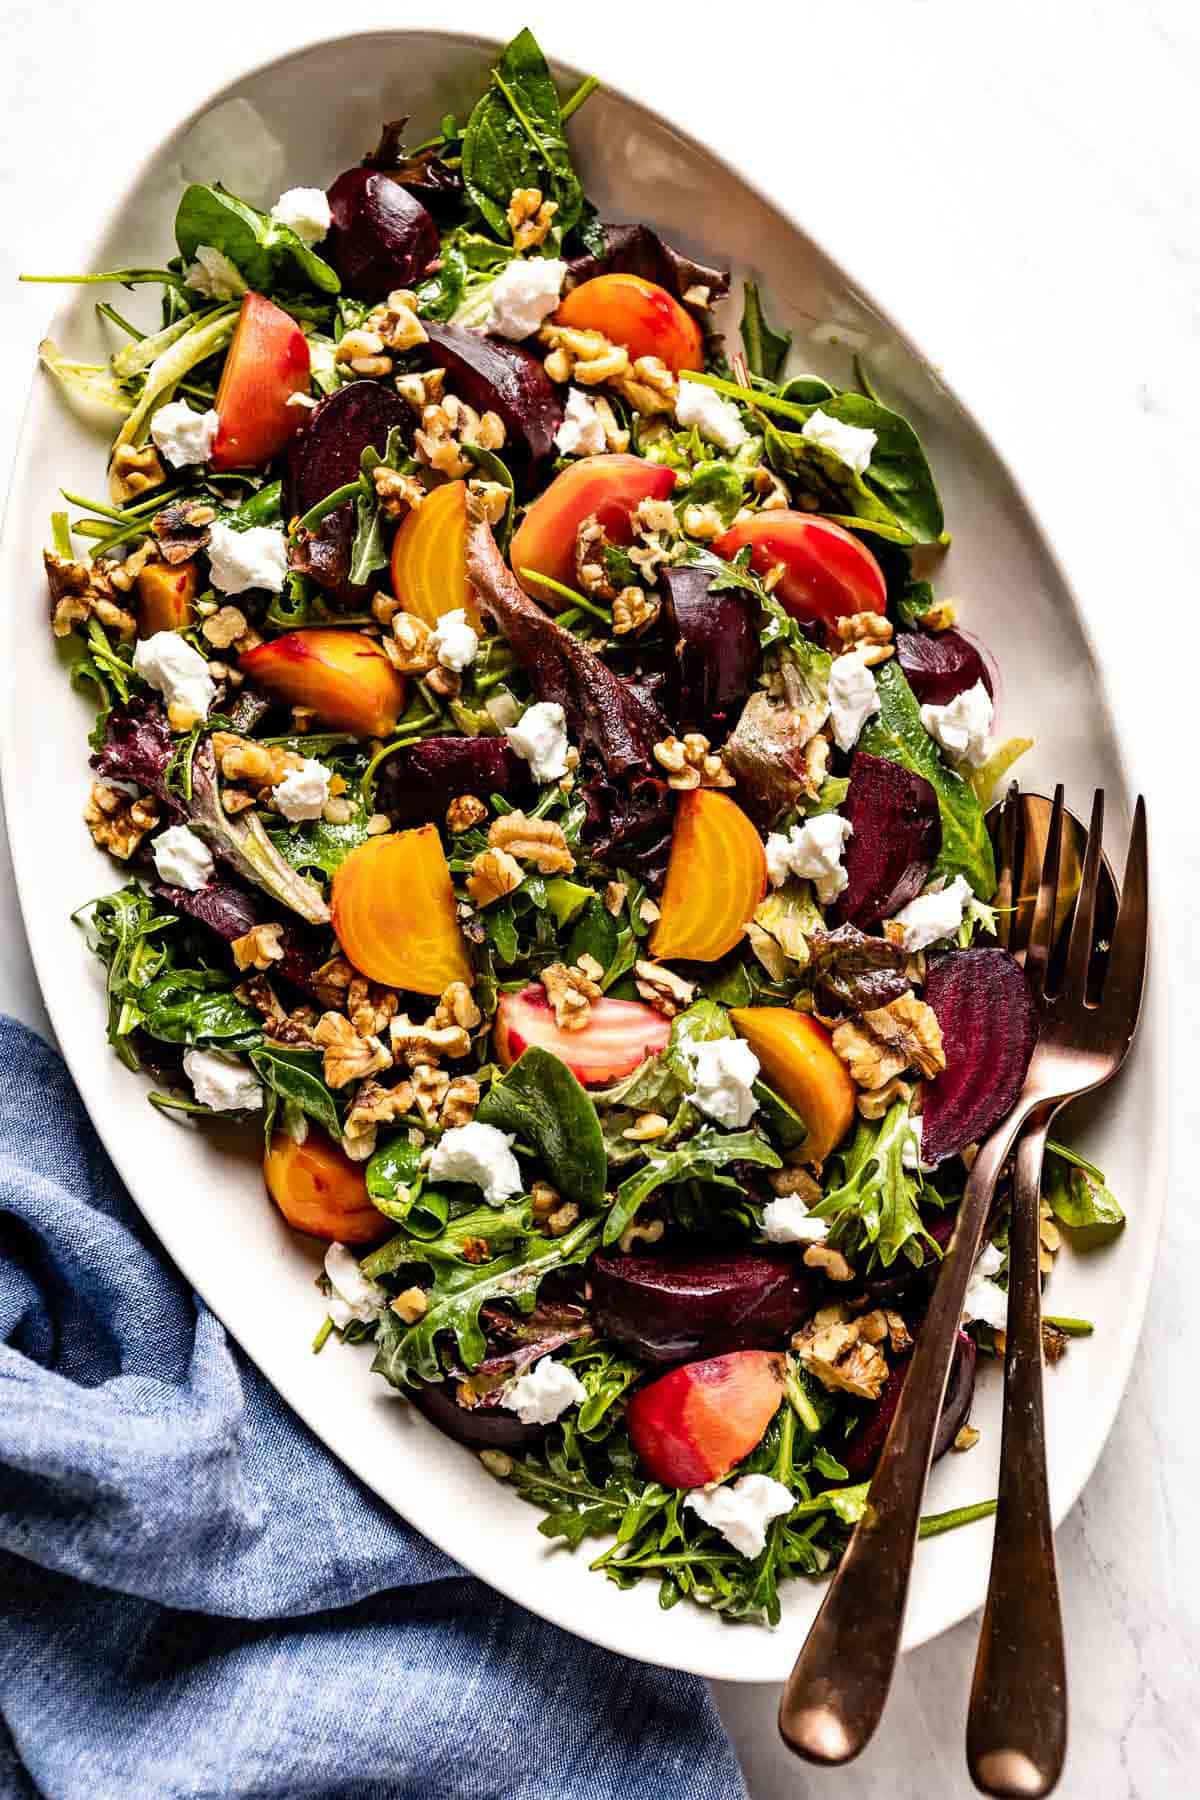 https://foolproofliving.com/wp-content/uploads/2017/01/Beet-Salad-with-Goat-Cheese-and-Walnuts.jpg